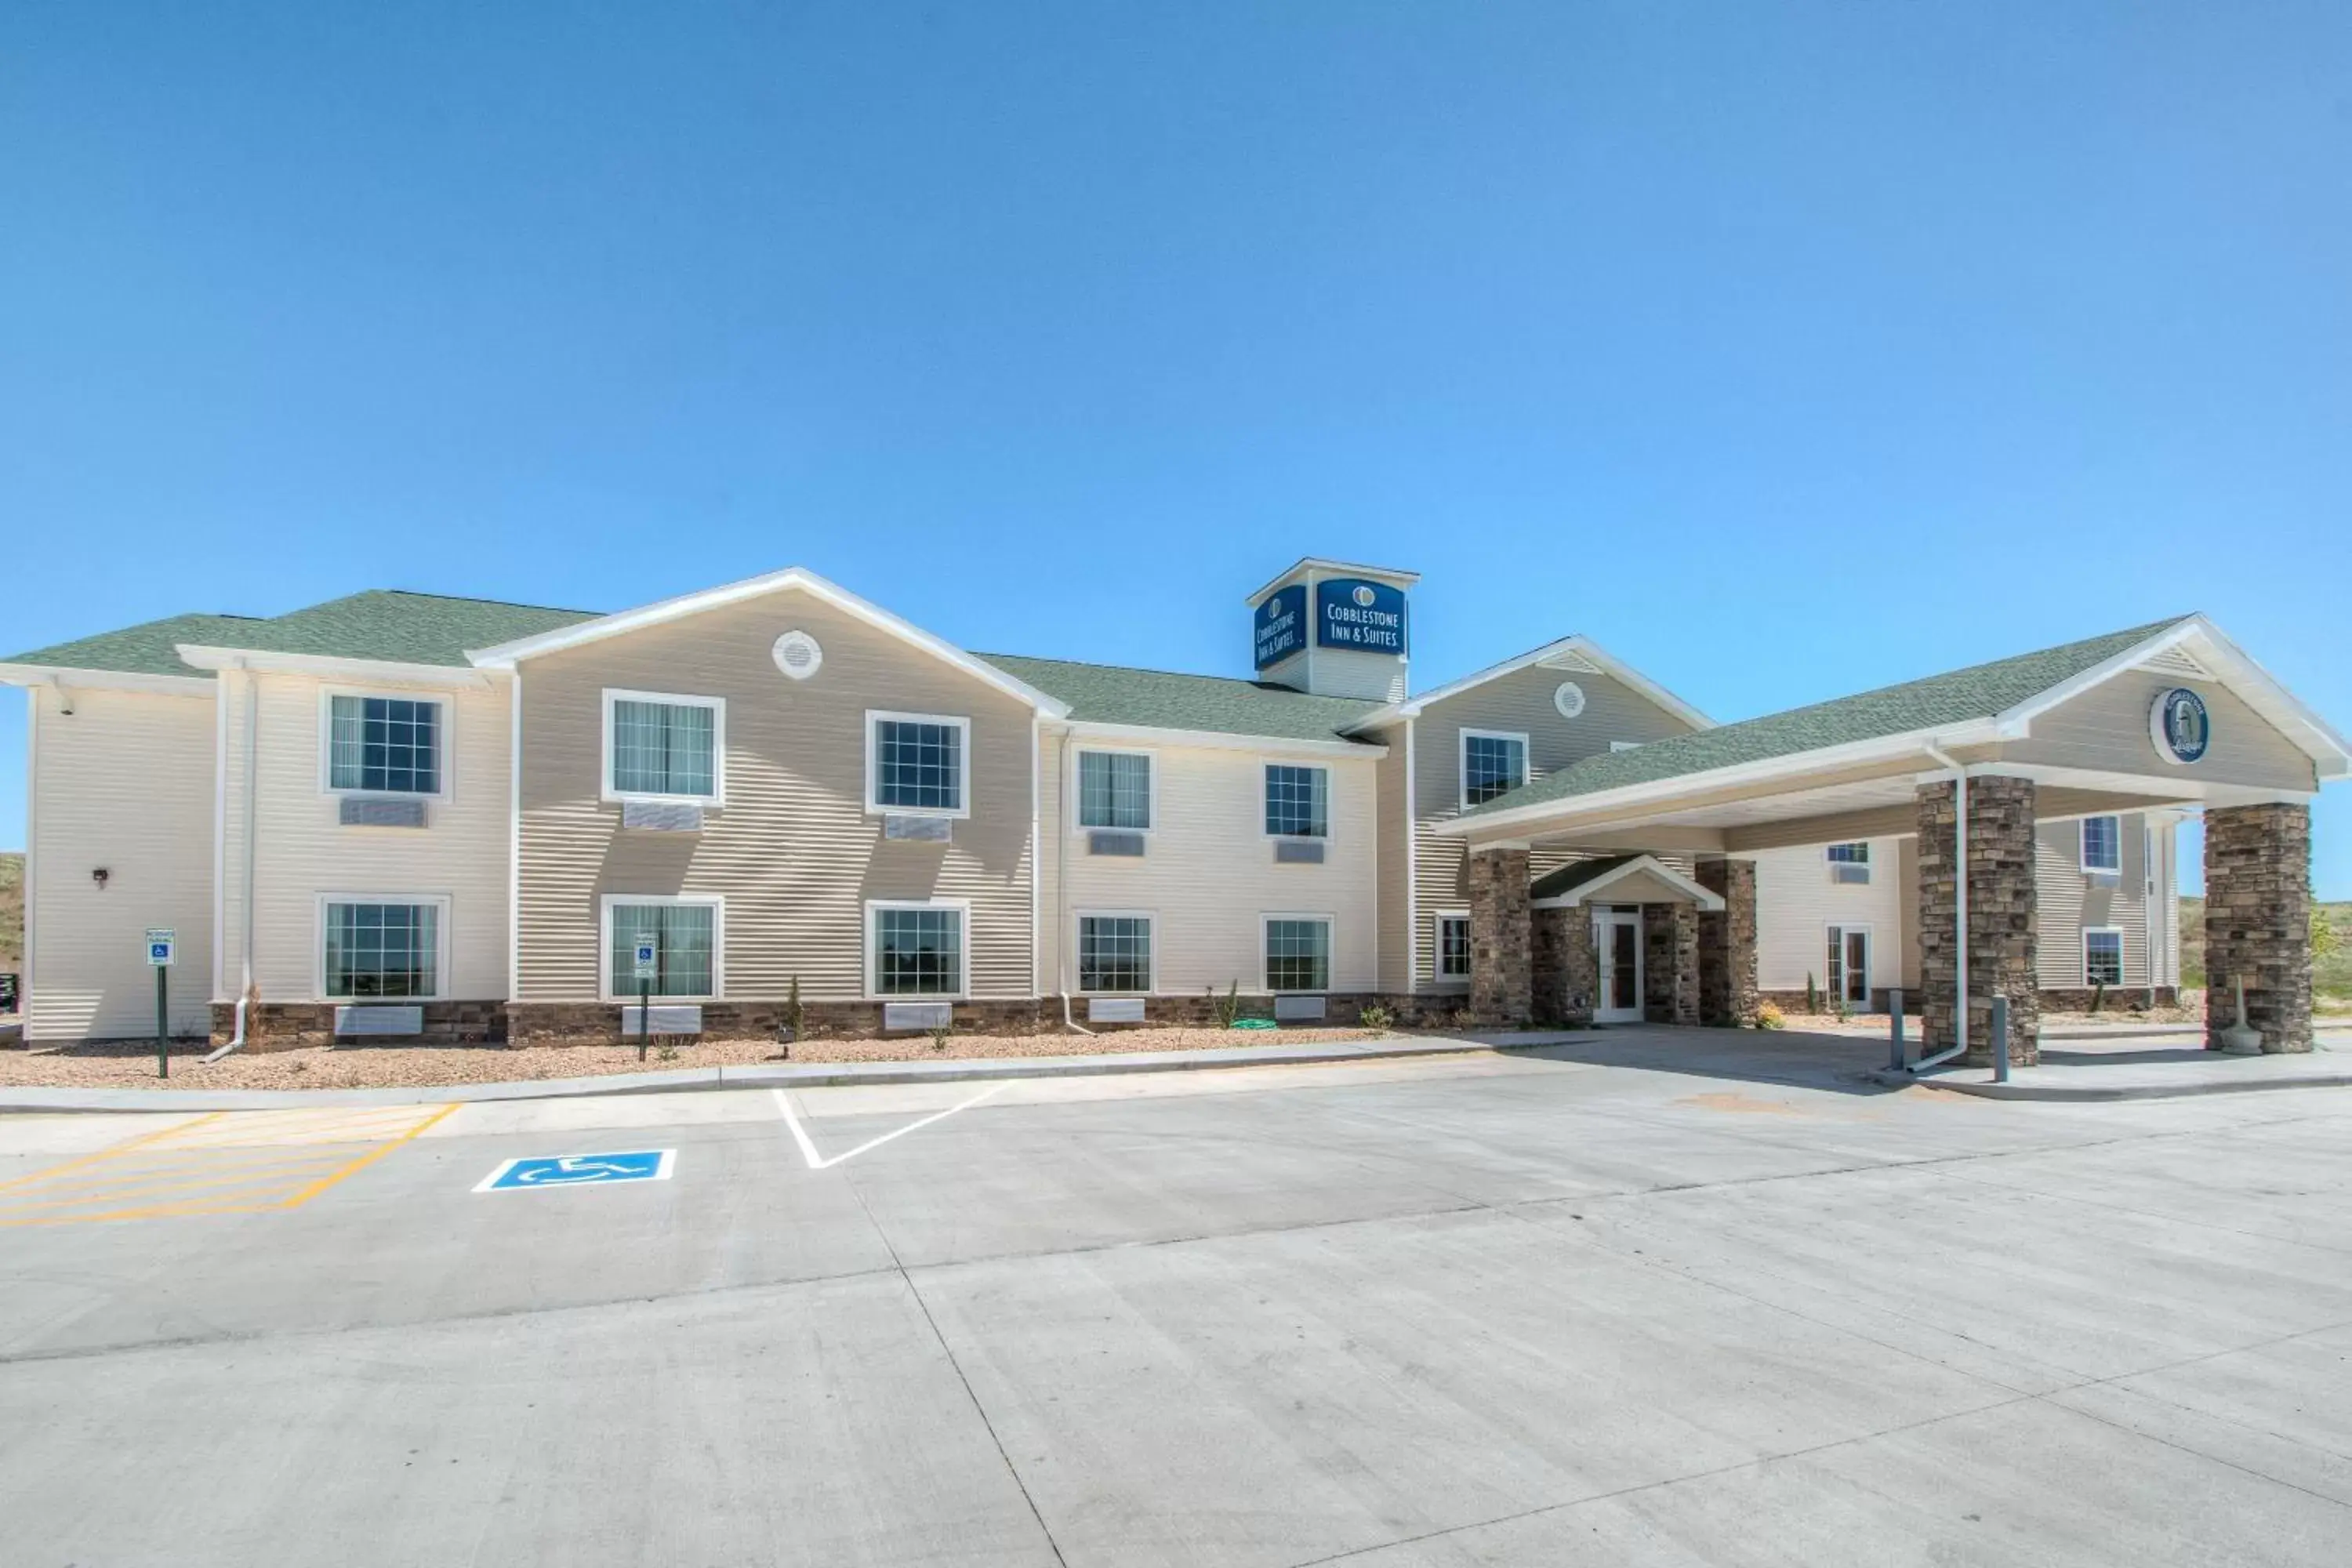 Property Building in Cobblestone Inn & Suites - Wray